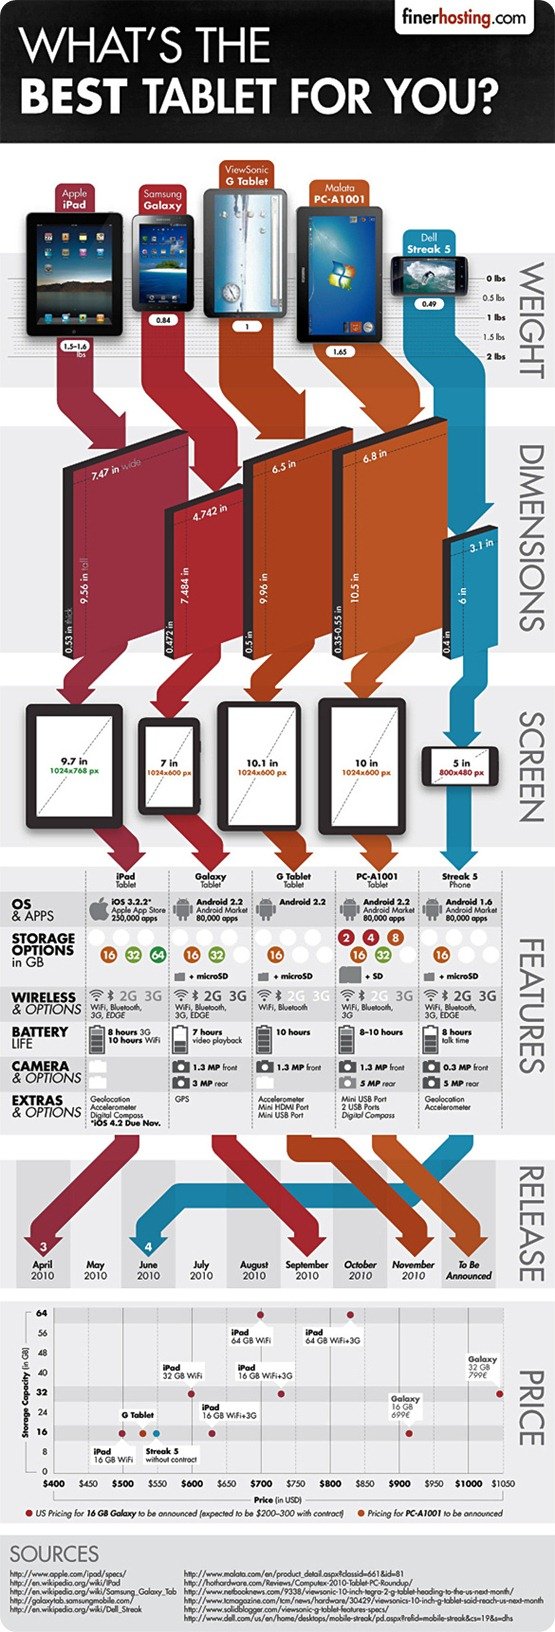 best-tablet-infographic